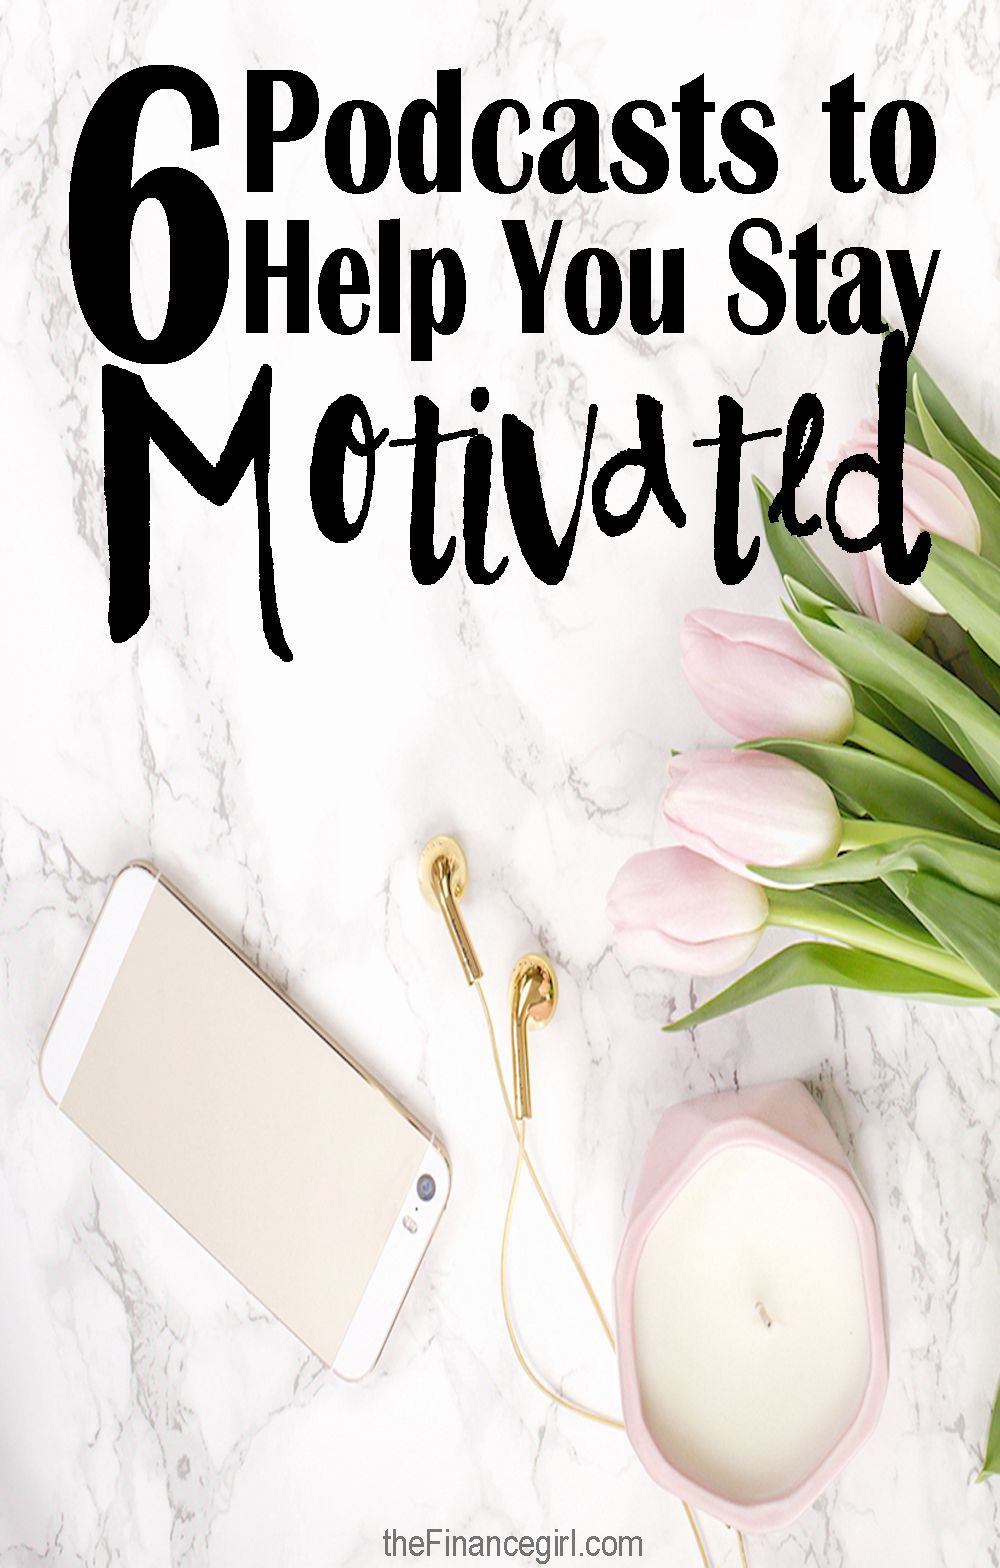 6 podcast episodes to help you stay motivated, happy, and successful. Personal development and intentional living podcast episodes